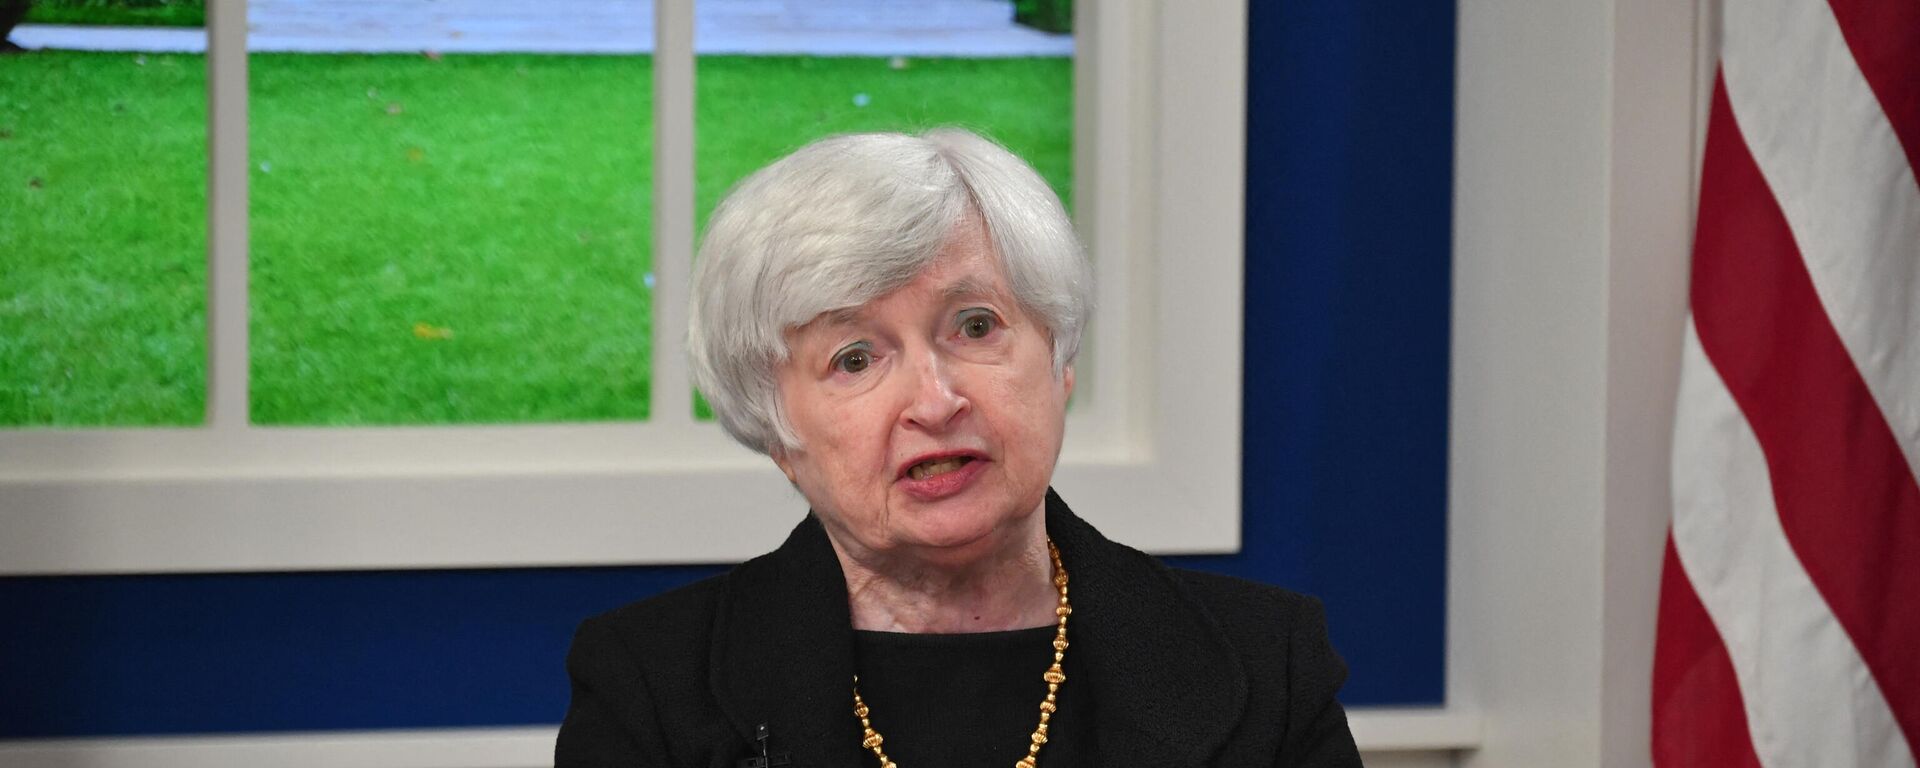 US Treasury Secretary Janet Yellen speaks during a meeting with business leaders and CEOs on the need to address the debt limit, on October 6, 2021, in the South Auditorium of the White House in Washington, DC. - Sputnik International, 1920, 20.01.2022